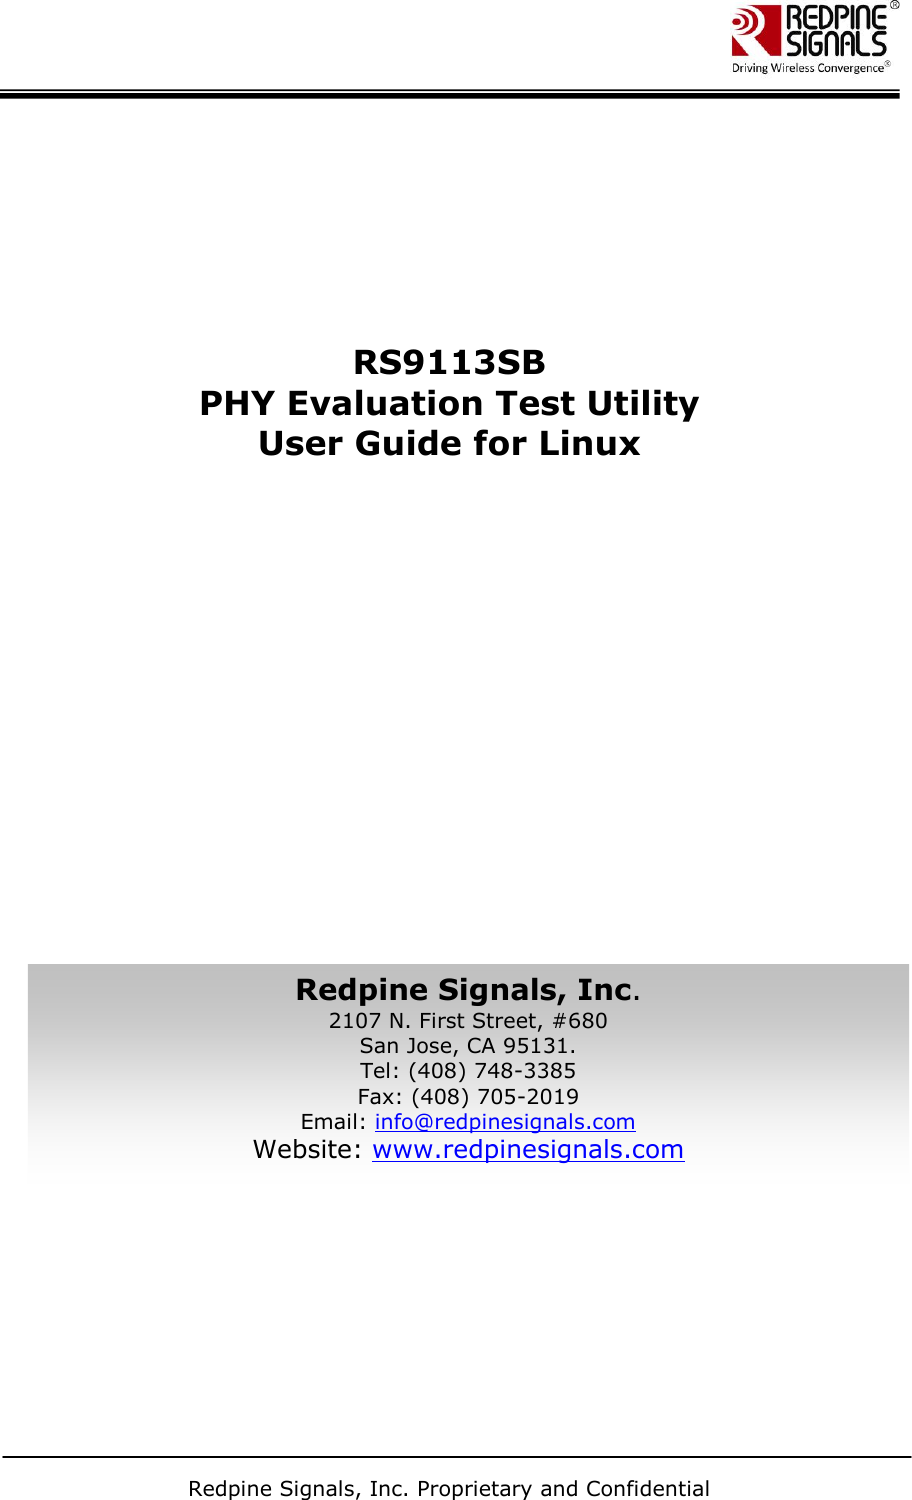       Redpine Signals, Inc. Proprietary and Confidential           RS9113SB PHY Evaluation Test Utility  User Guide for Linux         Redpine Signals, Inc. 2107 N. First Street, #680 San Jose, CA 95131. Tel: (408) 748-3385 Fax: (408) 705-2019  Email: info@redpinesignals.com  Website: www.redpinesignals.com  